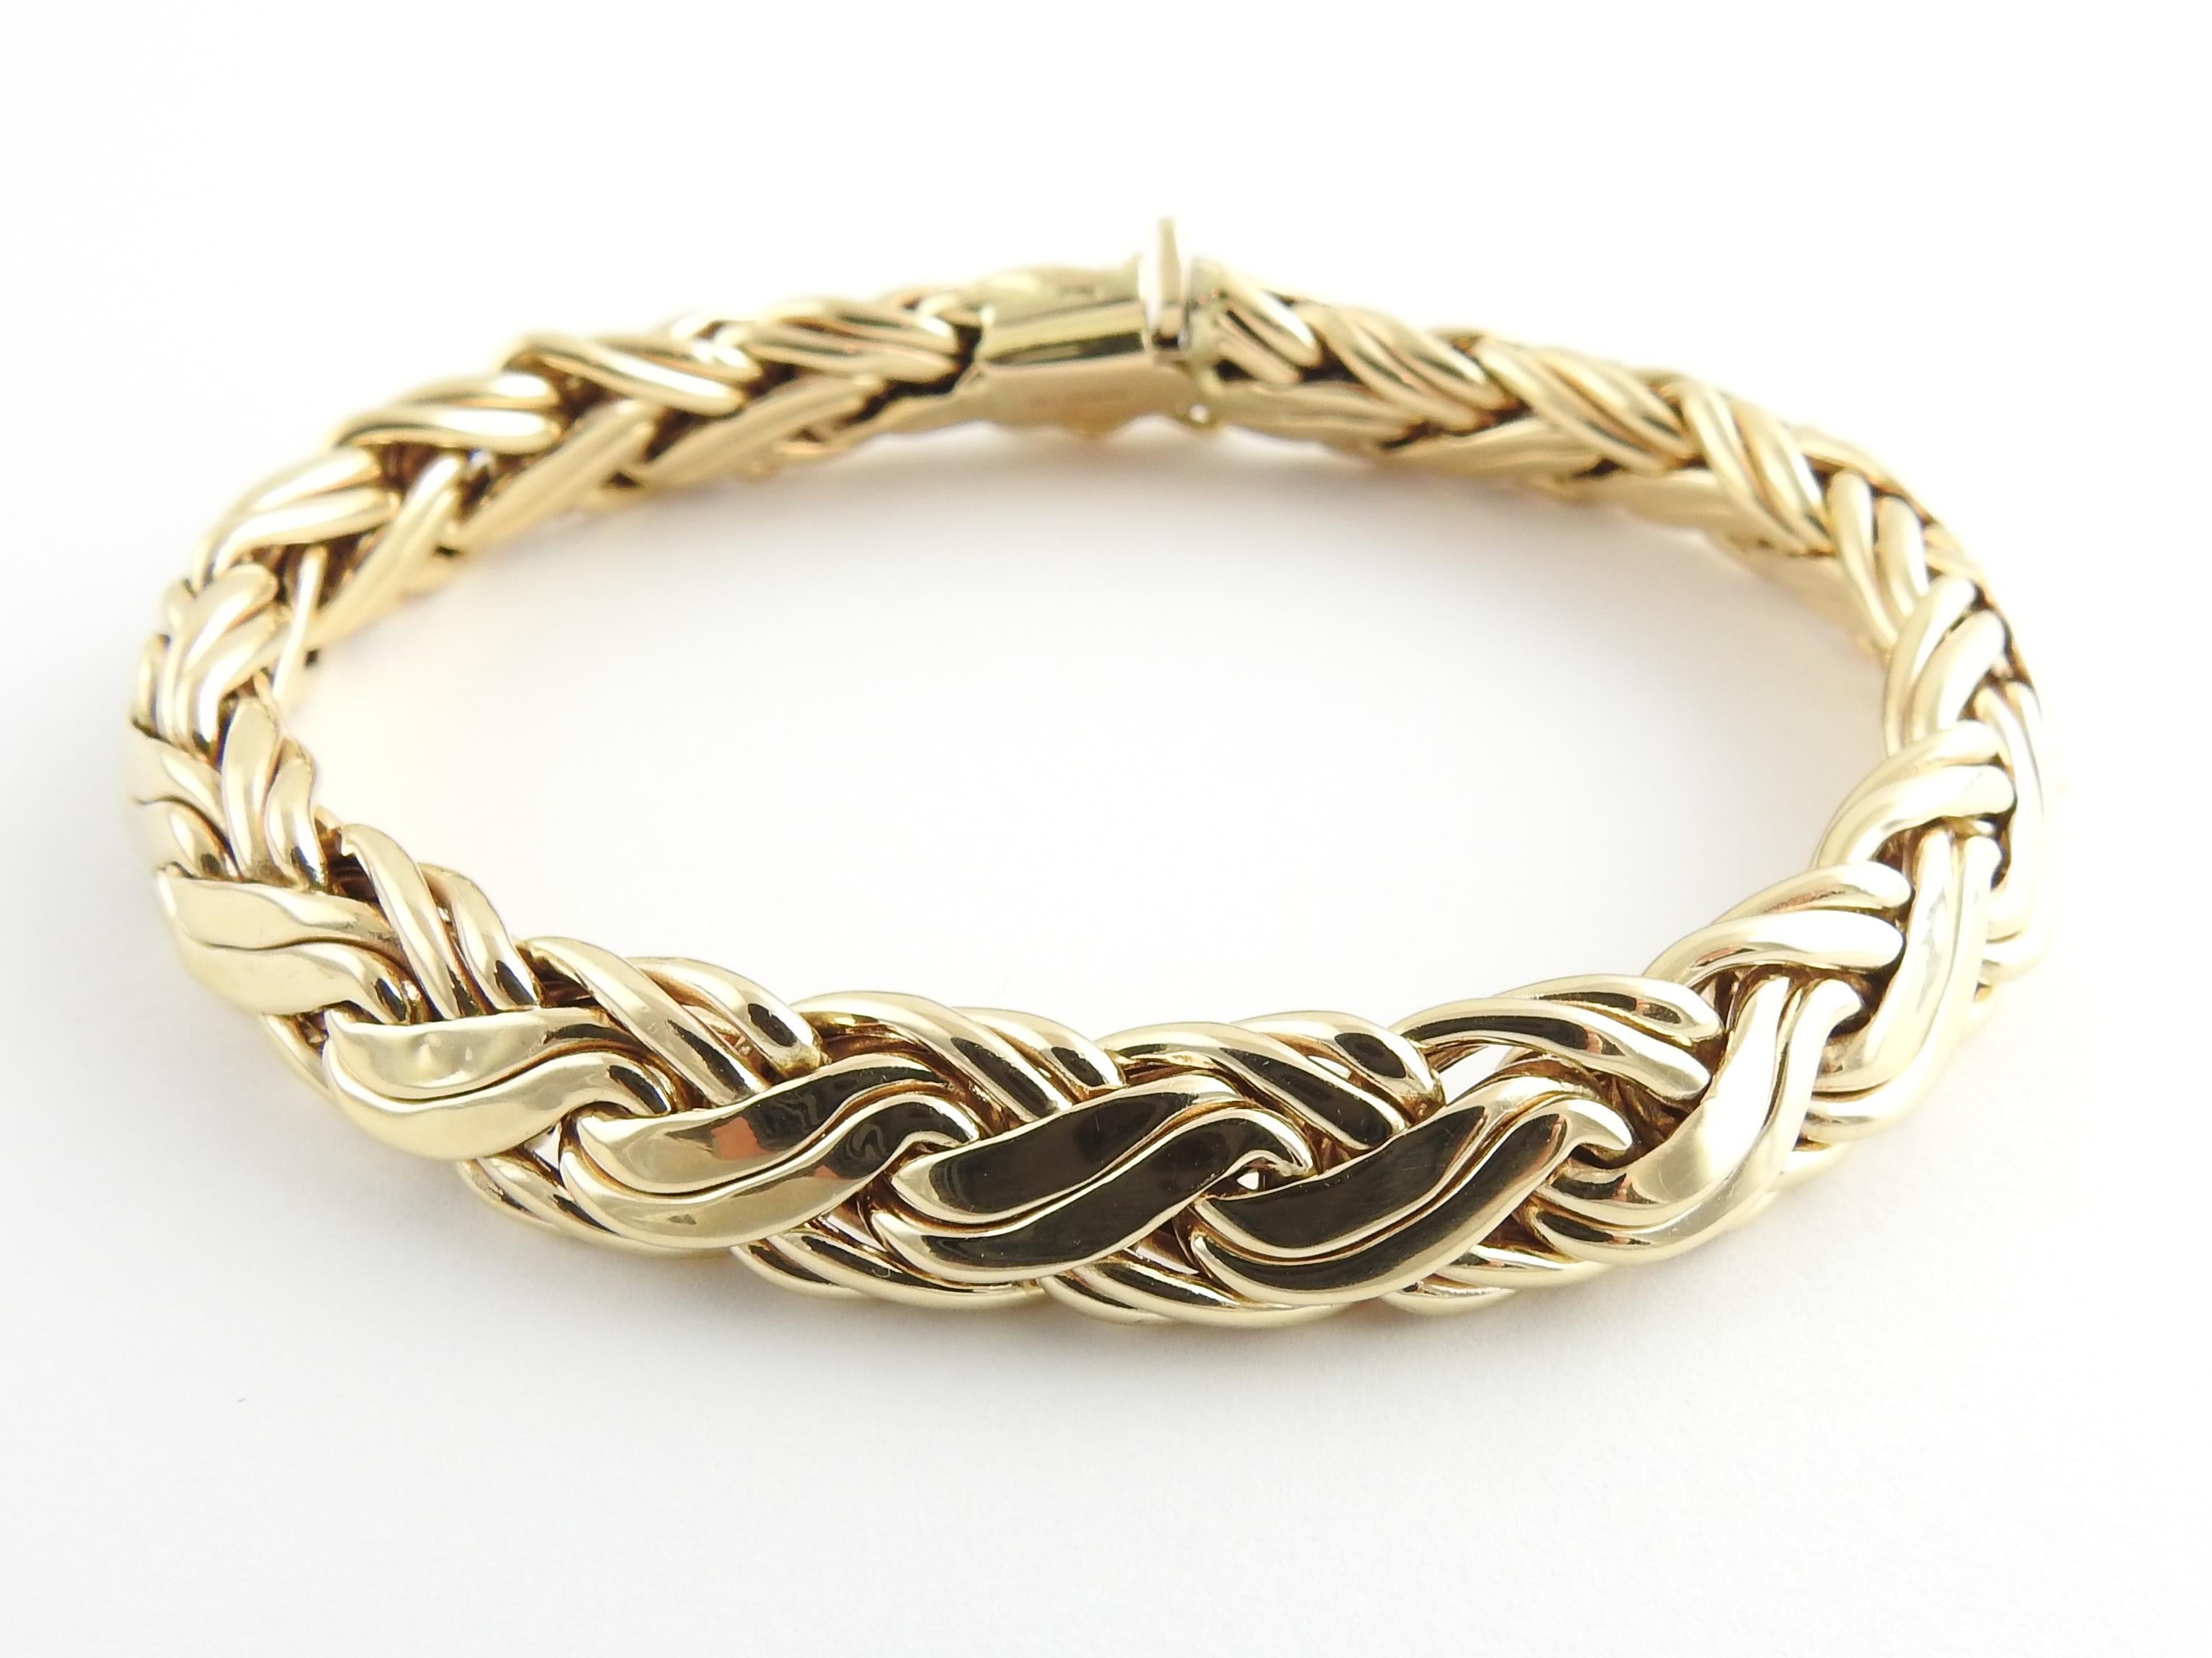 Tiffany & Co. 14K Yellow Gold Russian Weave Bracelet

This authentic Tiffany & Co. bracelet is approx. 7.5